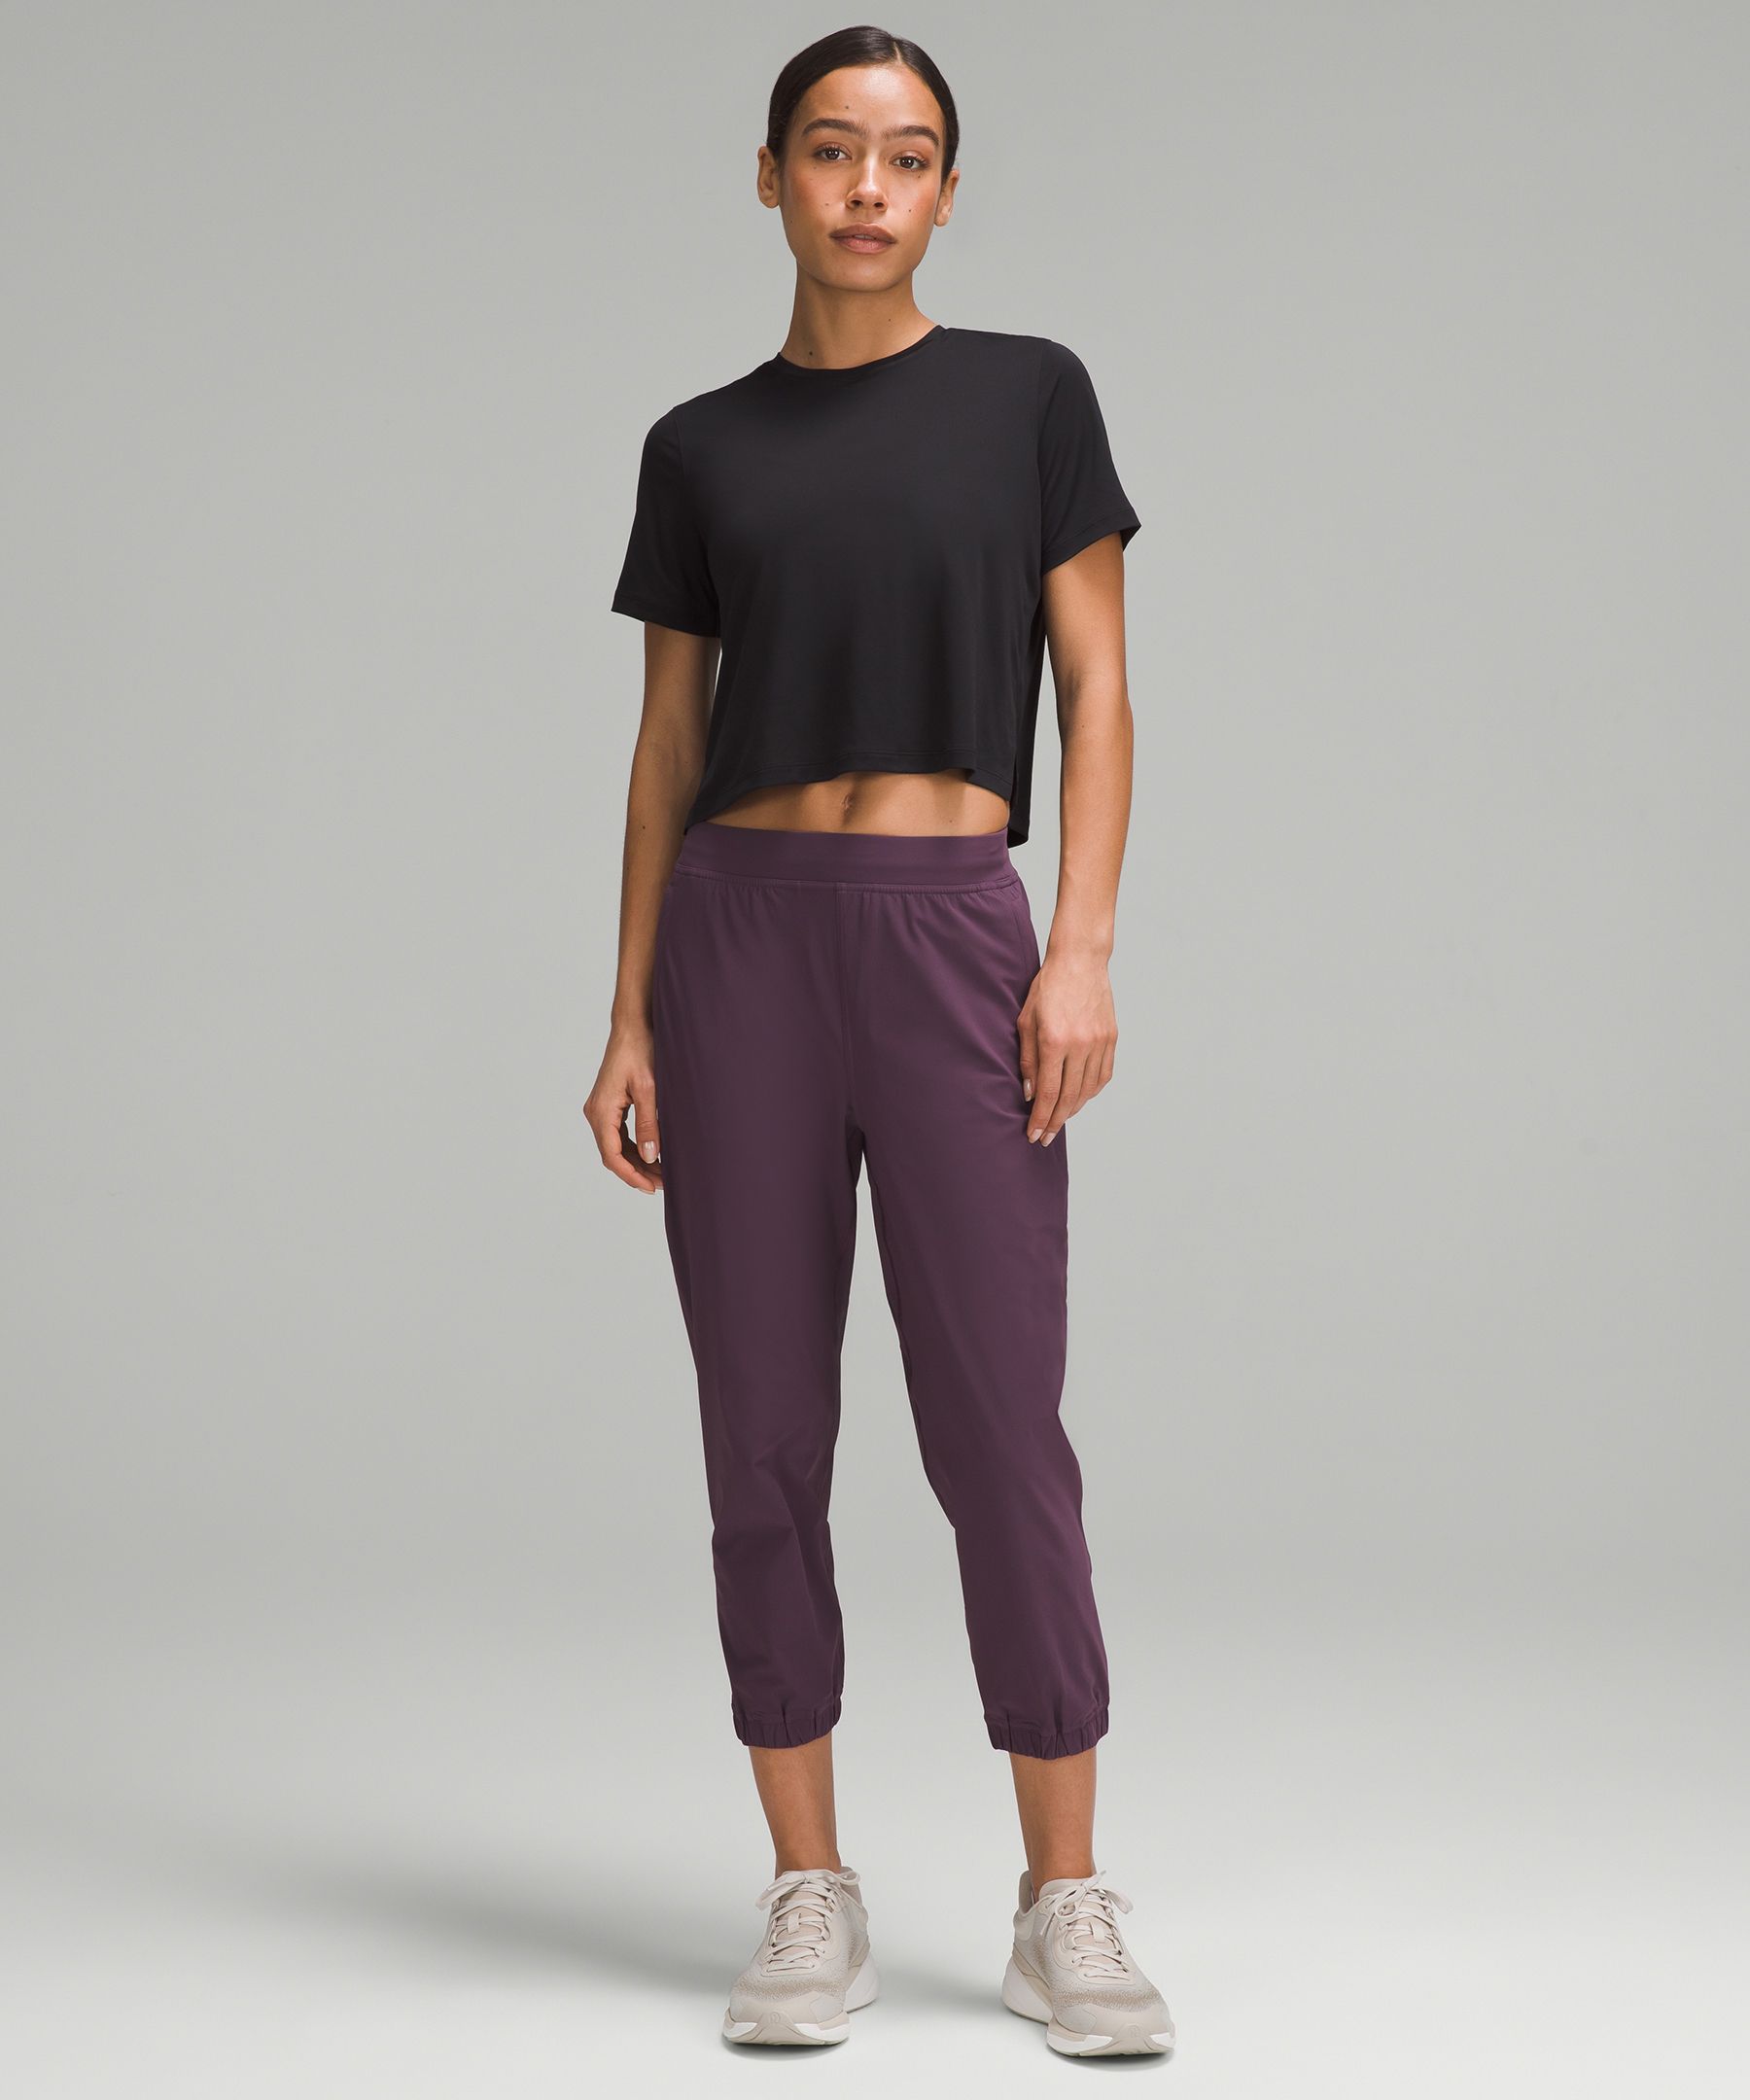 Lululemon Adapted State HR Jogger *Full Length - Roasted Brown - 4 - NWT!